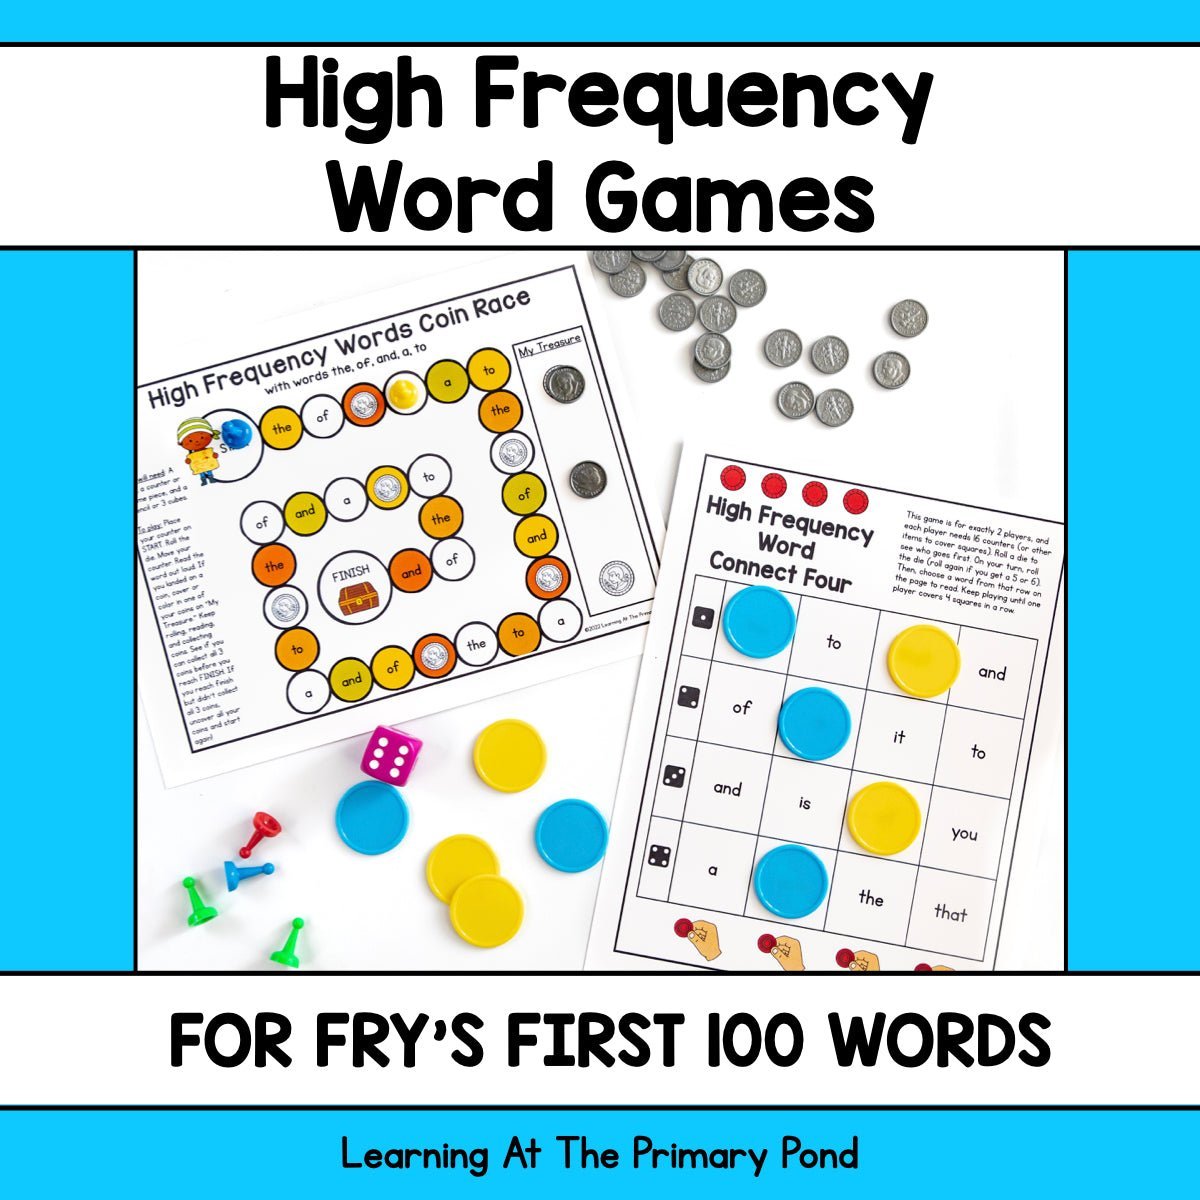 High Frequency Word Games | Fry’s First 100 Sight Words - learning-at-the-primary-pond